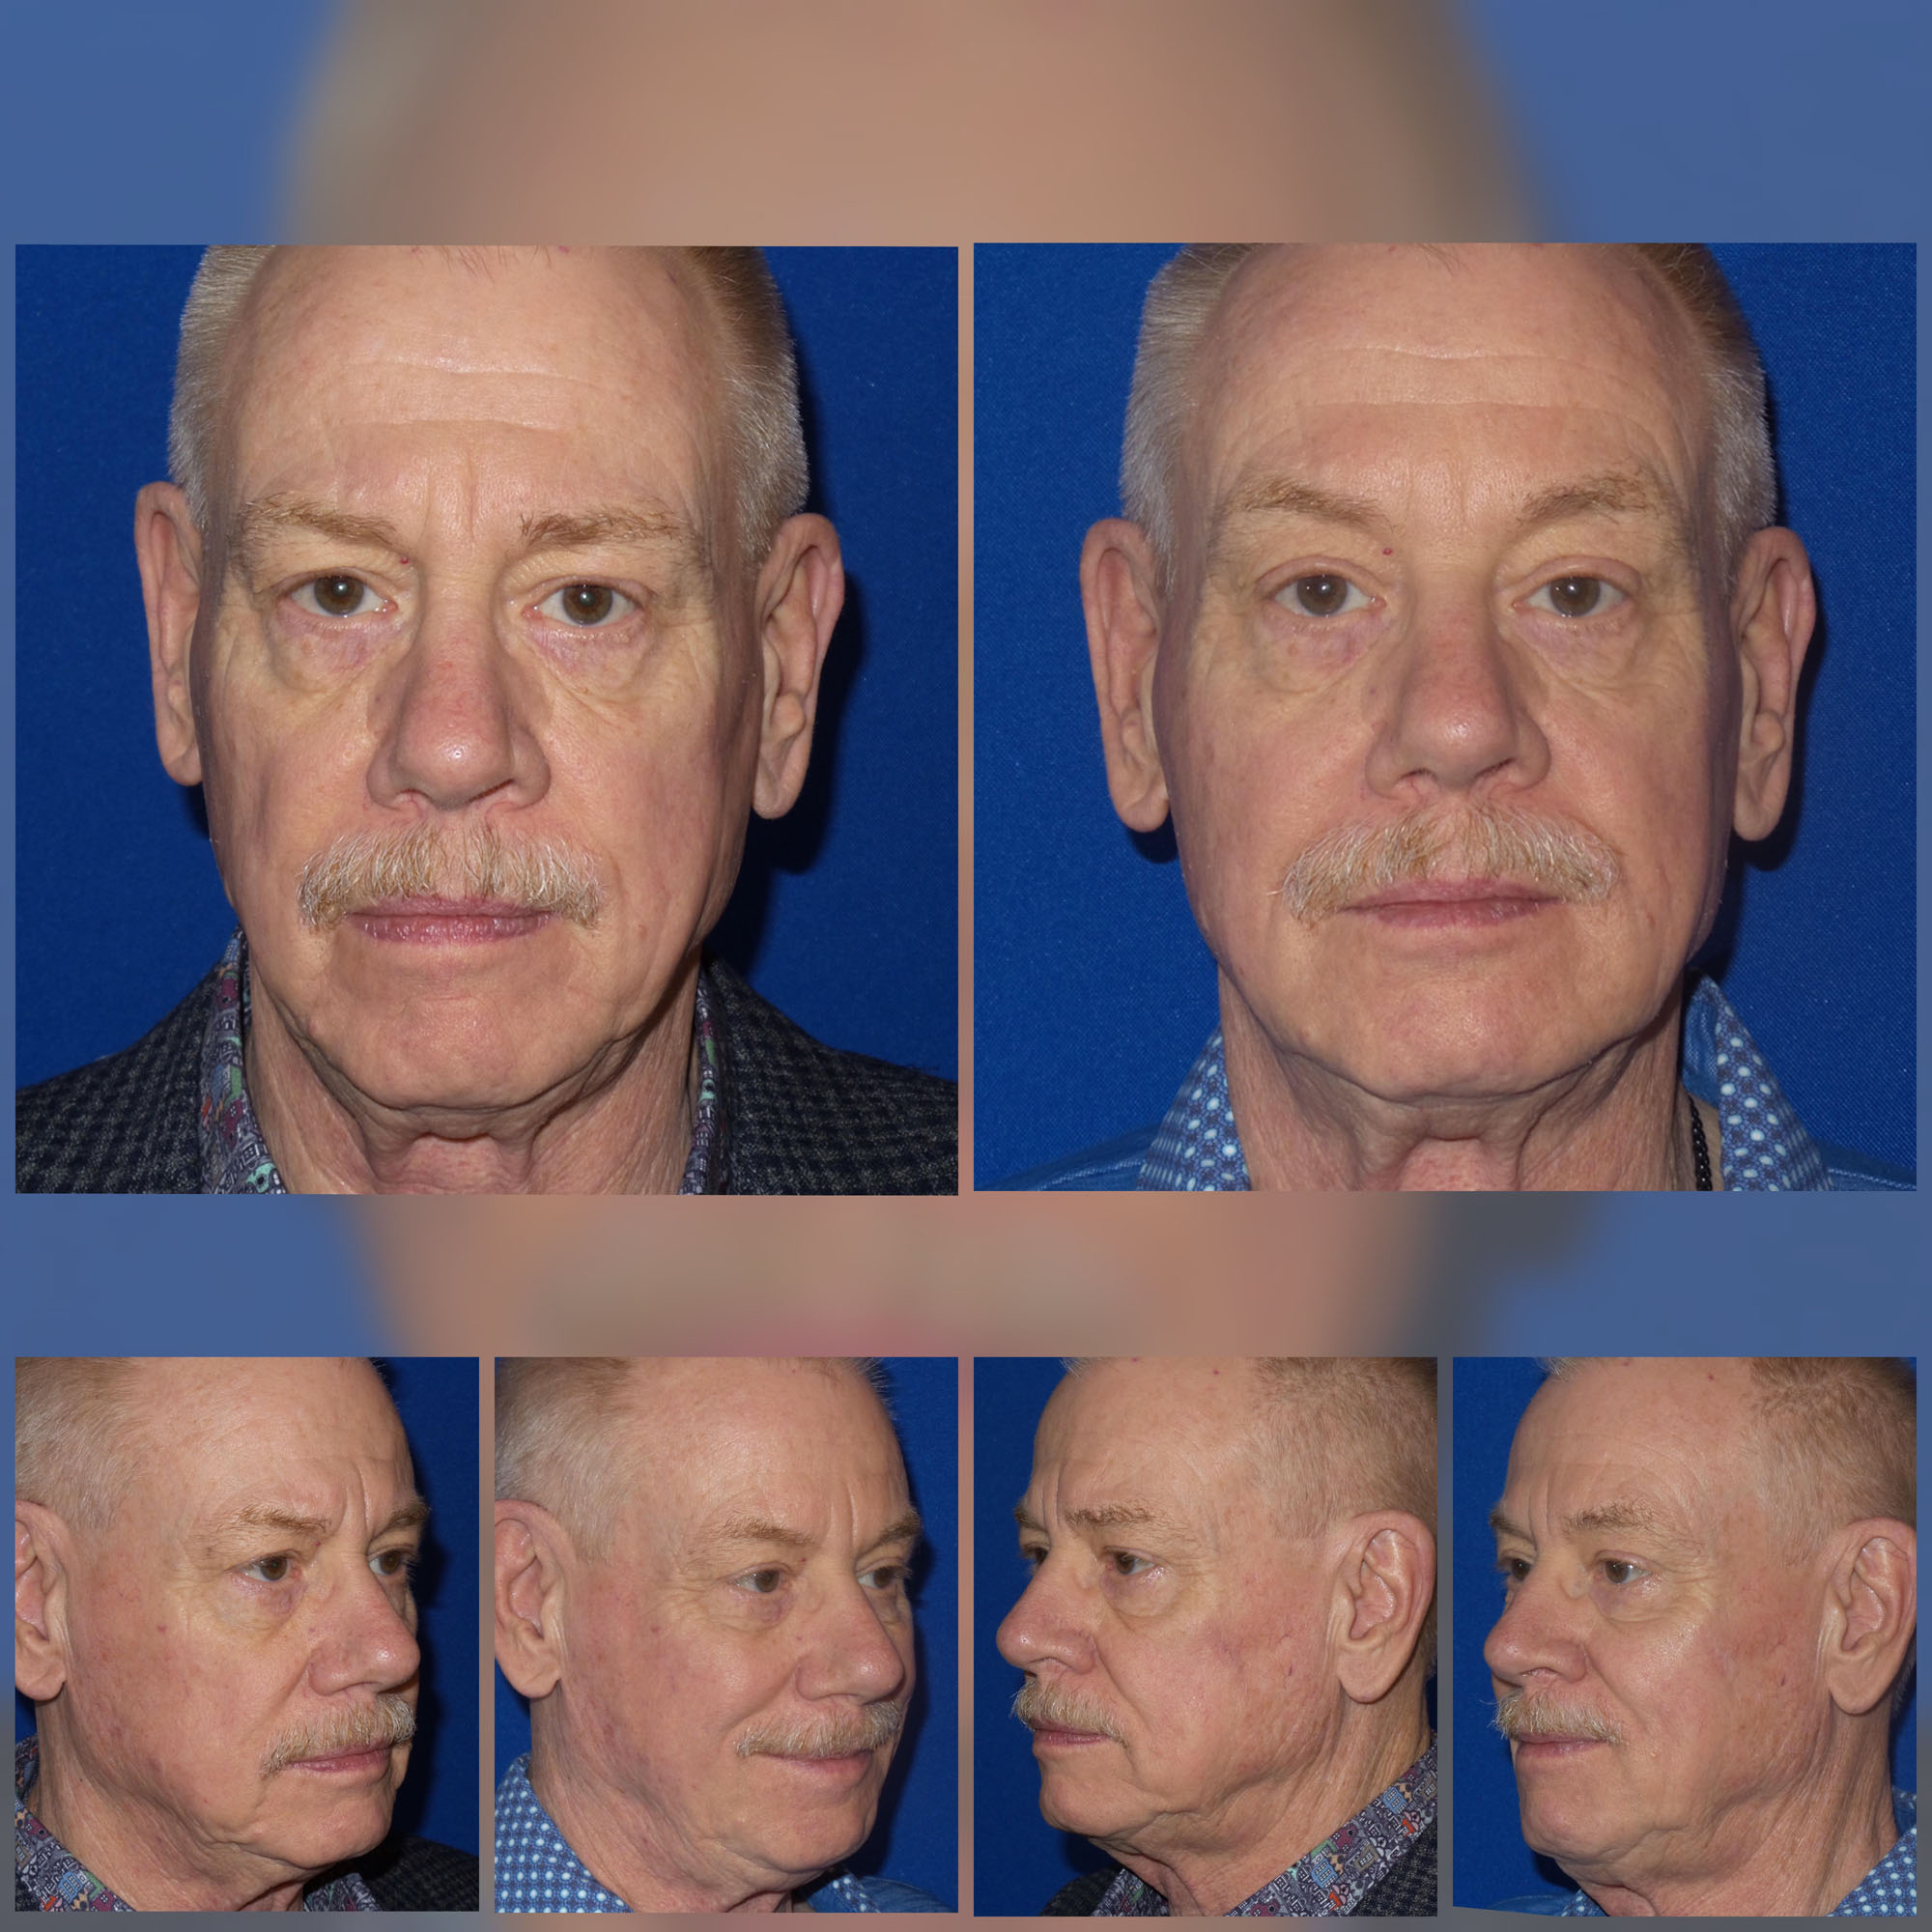 Mid & Full Face Filler Before and After photos from Refresh Aesthetic Center in Whitefish Bay WI